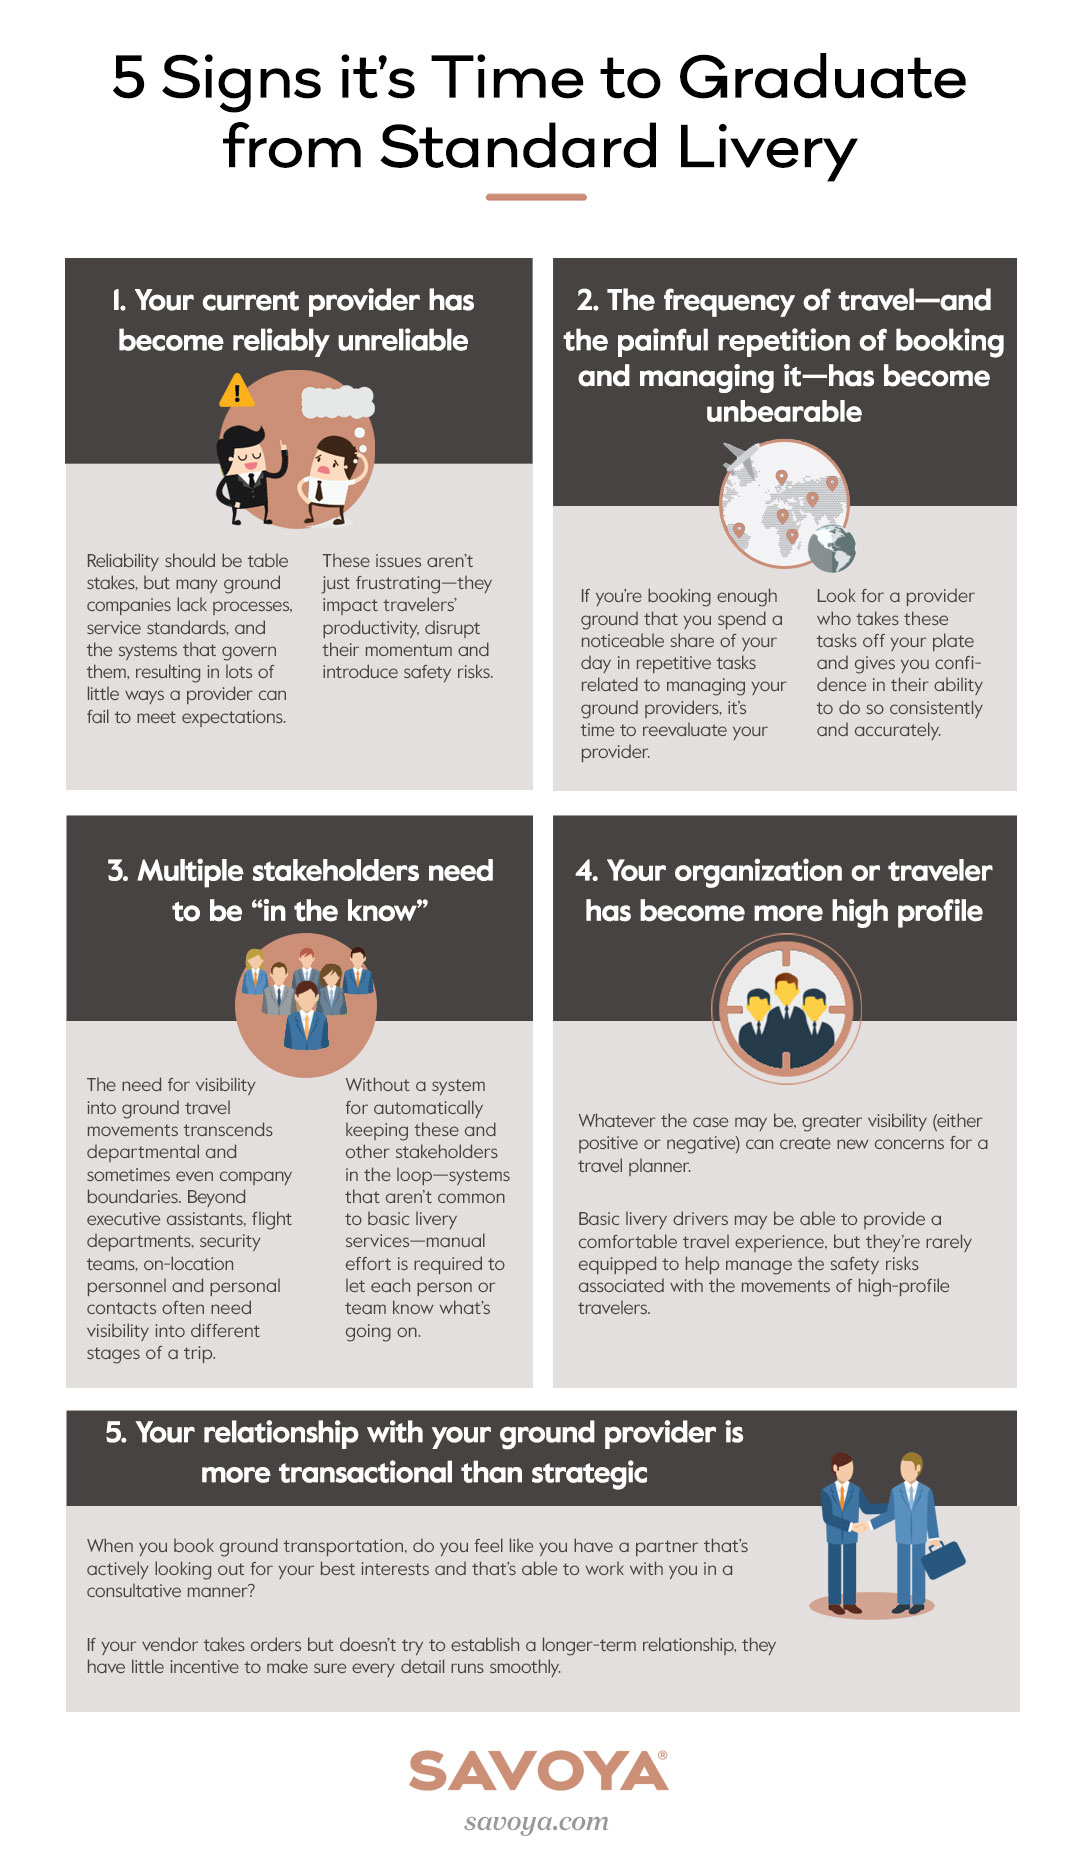 5 Signs It’s Time to Graduate from Standard Livery Infographic